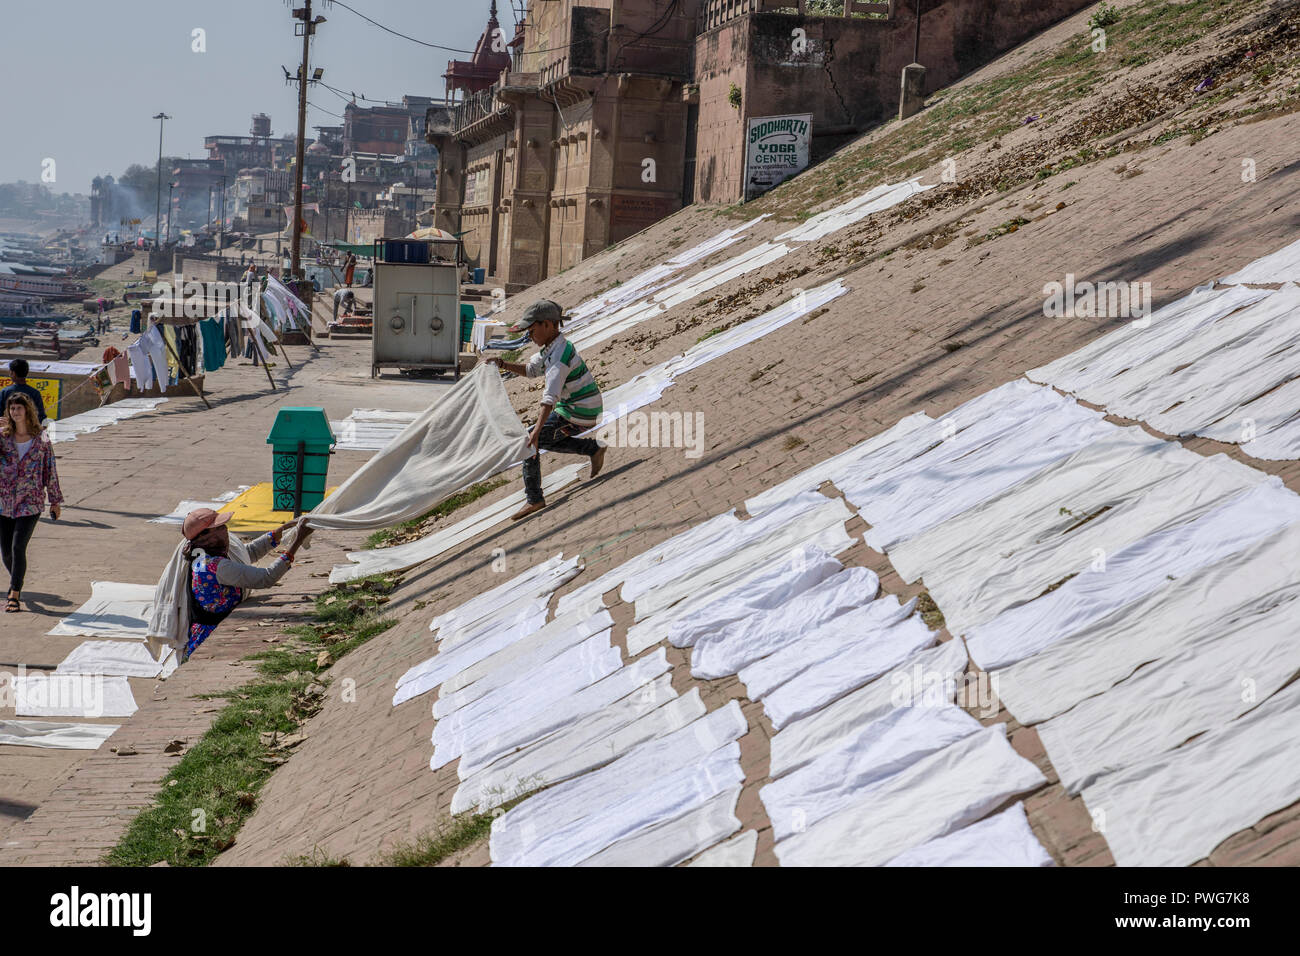 Laundry day on the Ganges river, Varanasi, Uttar Pradesh, India. Clothes and linen are washed in the river and spread to dry on the river's bank Stock Photo